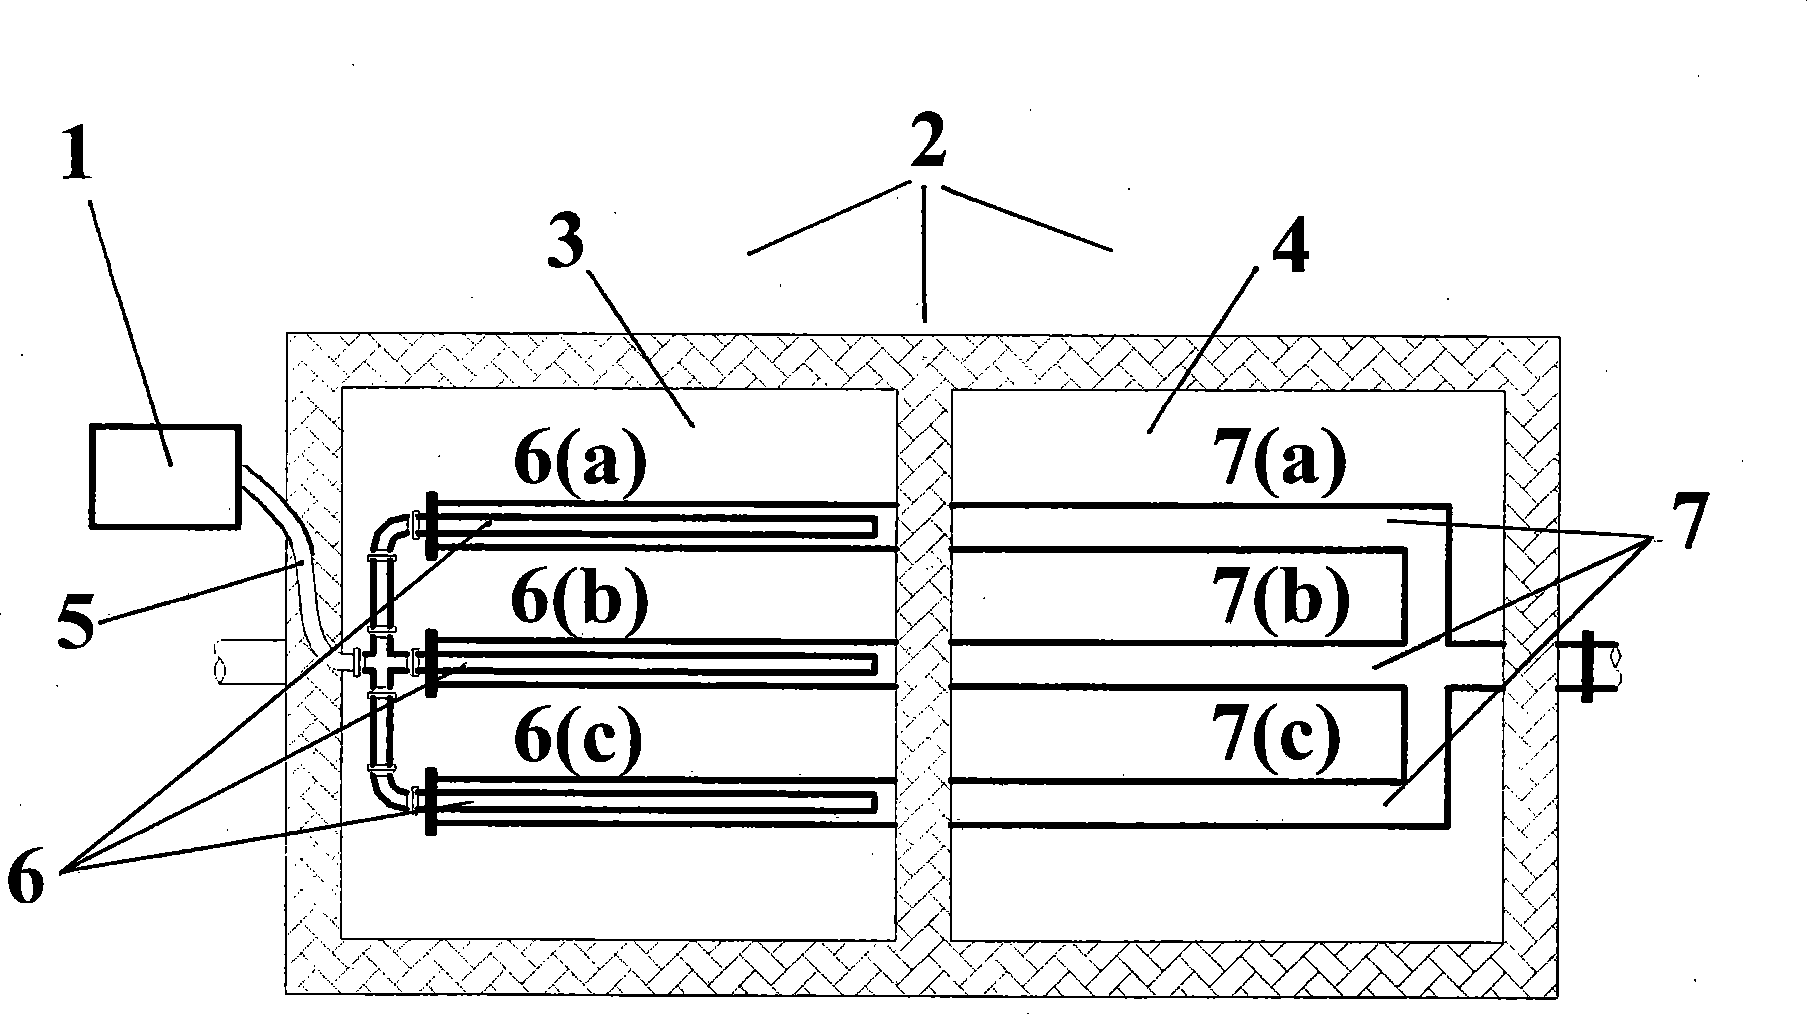 Composite vertical current artificial wetland oxygenation system